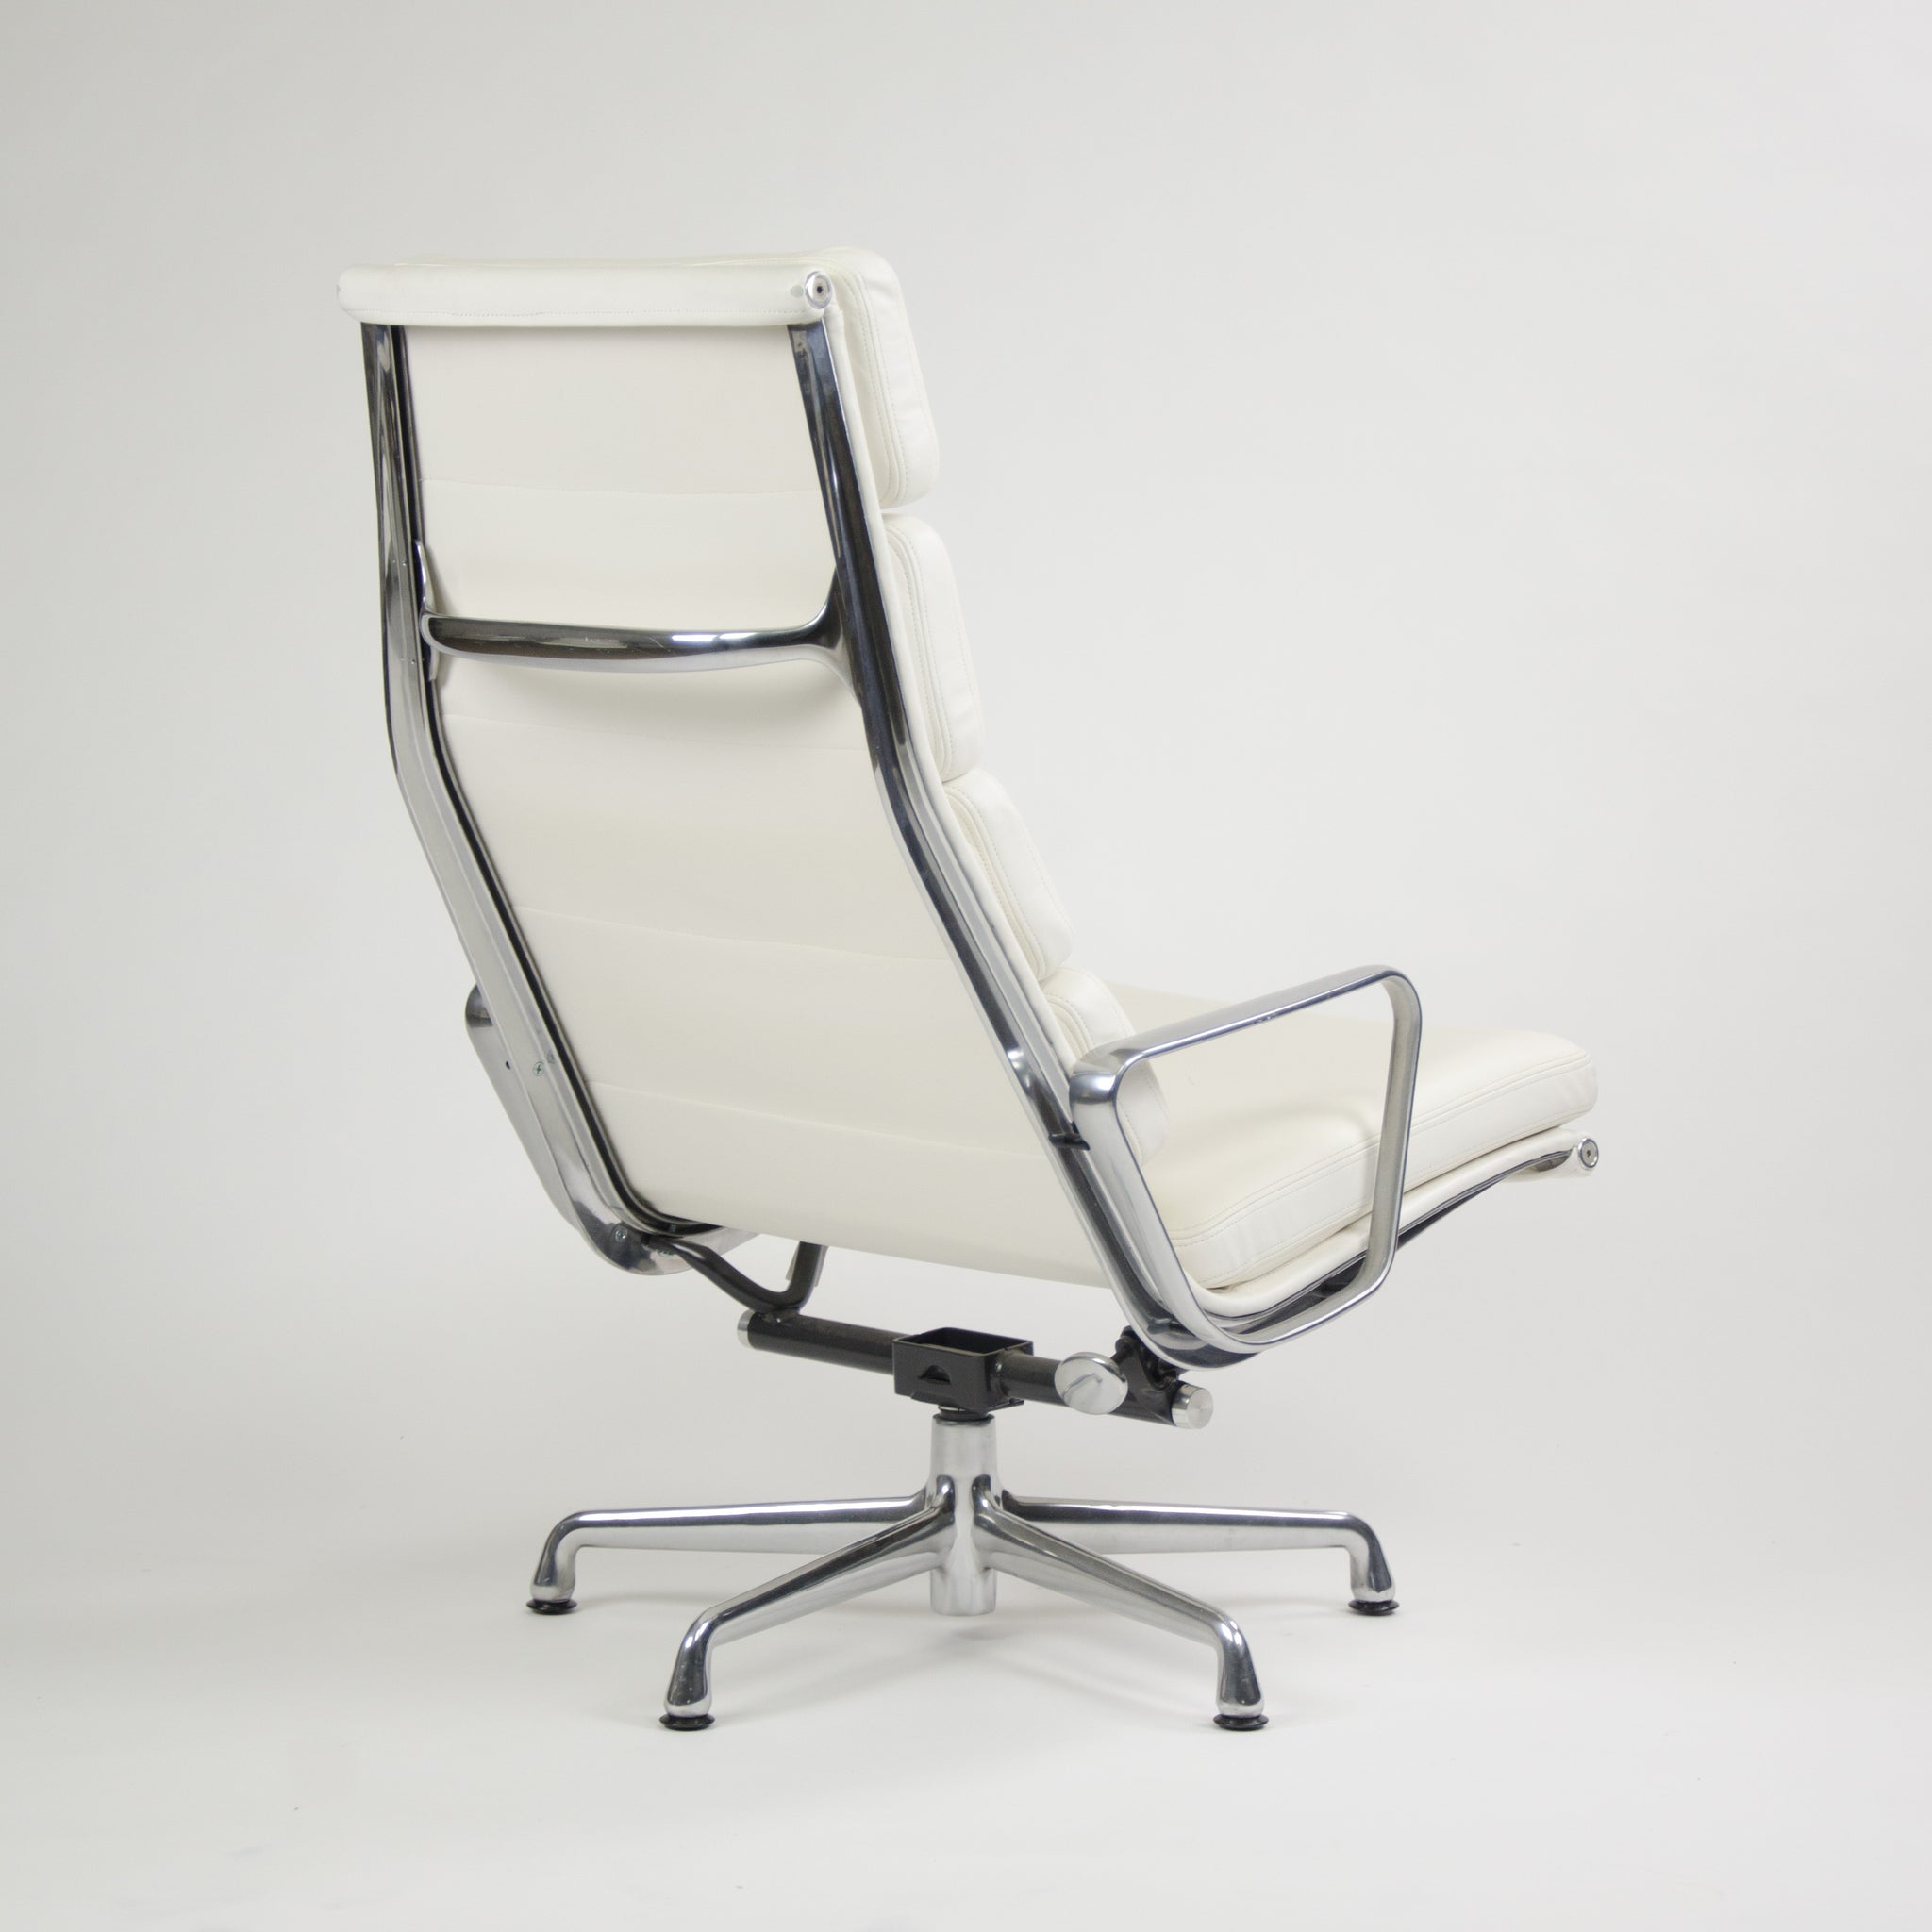 SOLD Eames Herman Miller Soft Pad Aluminum Group Lounge Chairs White Leather 2x 2008